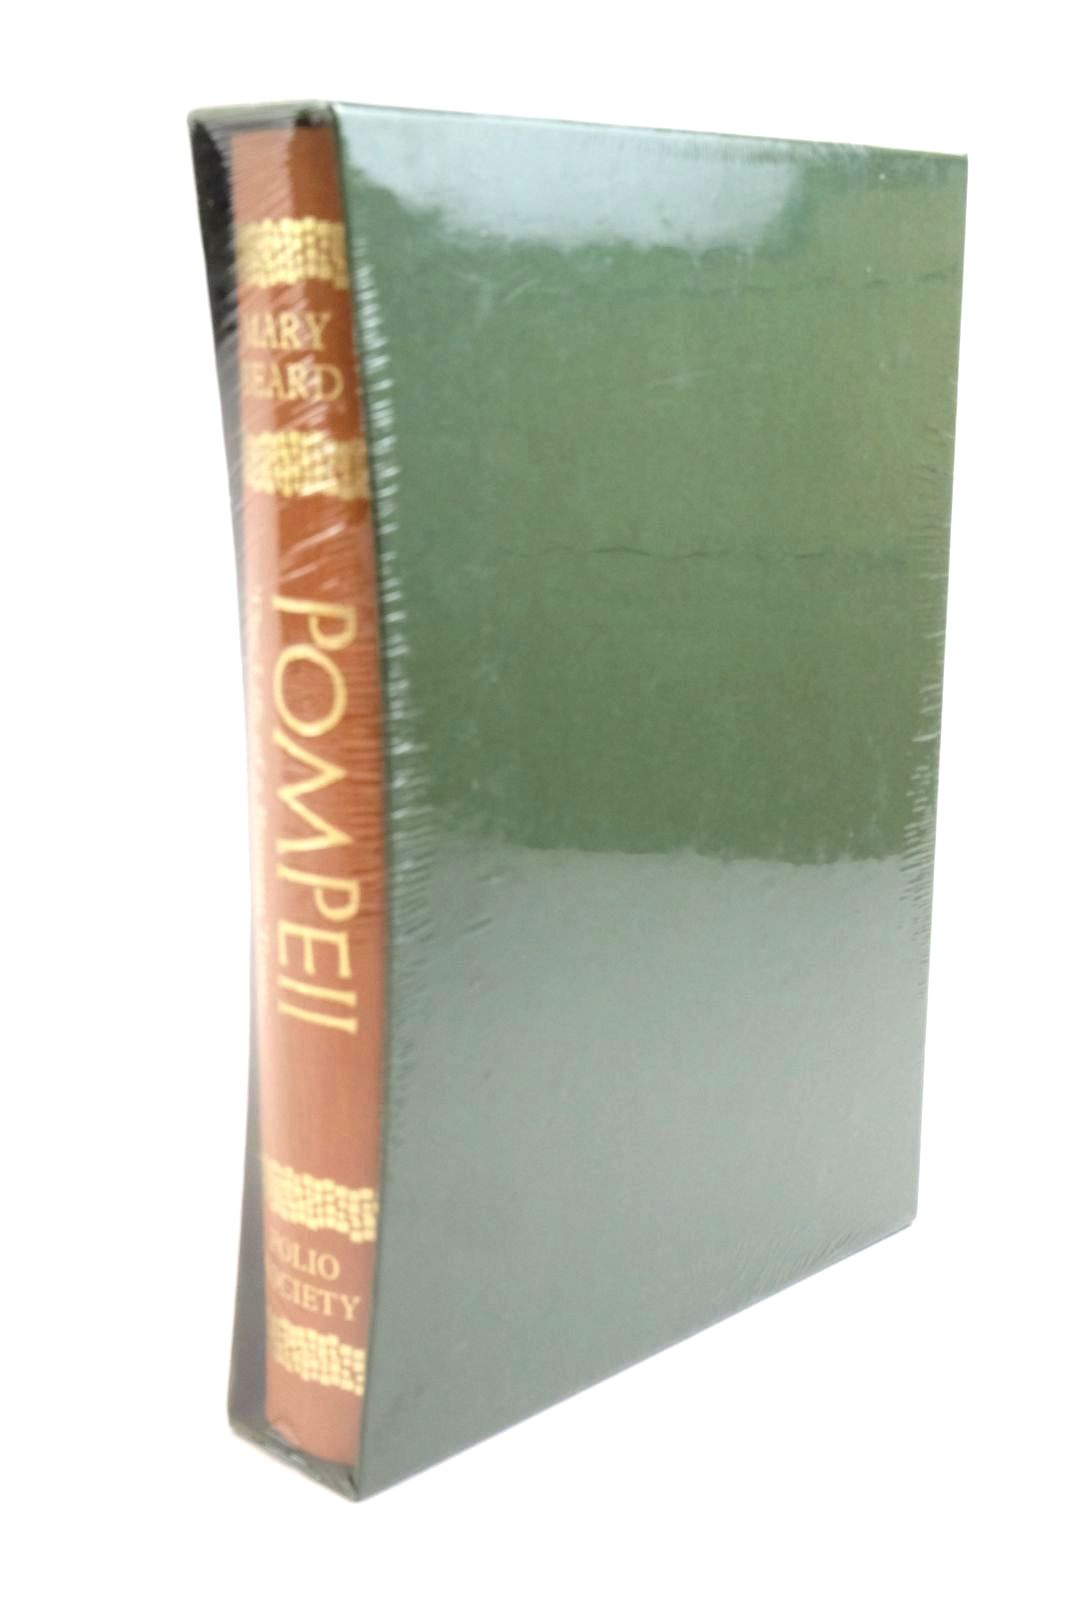 Photo of POMPEII: THE LIFE OF A ROMAN TOWN written by Beard, Mary published by Folio Society (STOCK CODE: 1322331)  for sale by Stella & Rose's Books